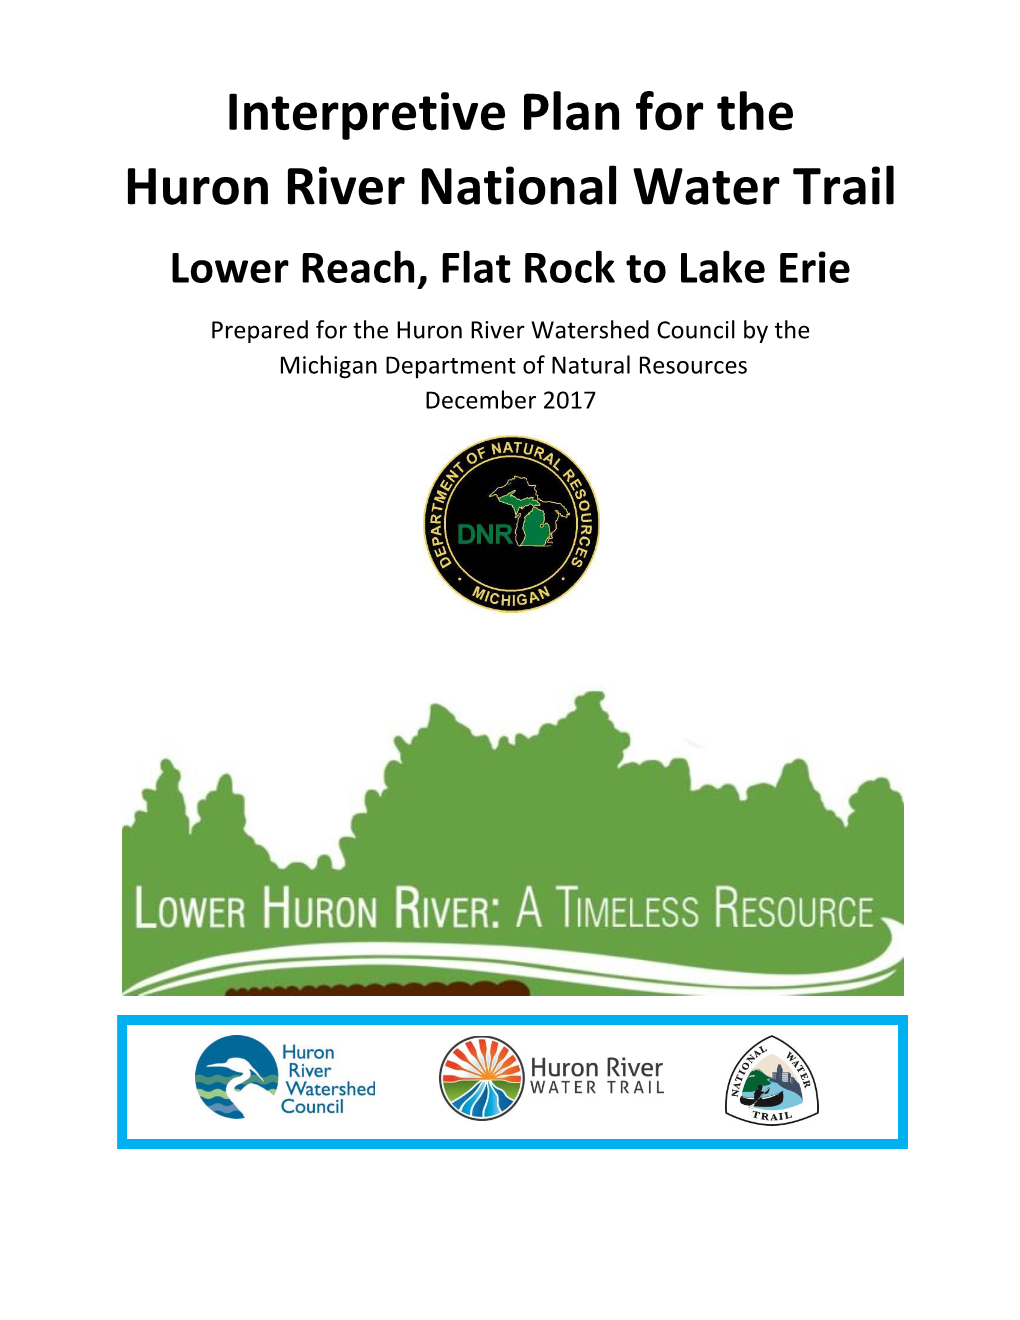 Interpretive Plan for the Huron River National Water Trail